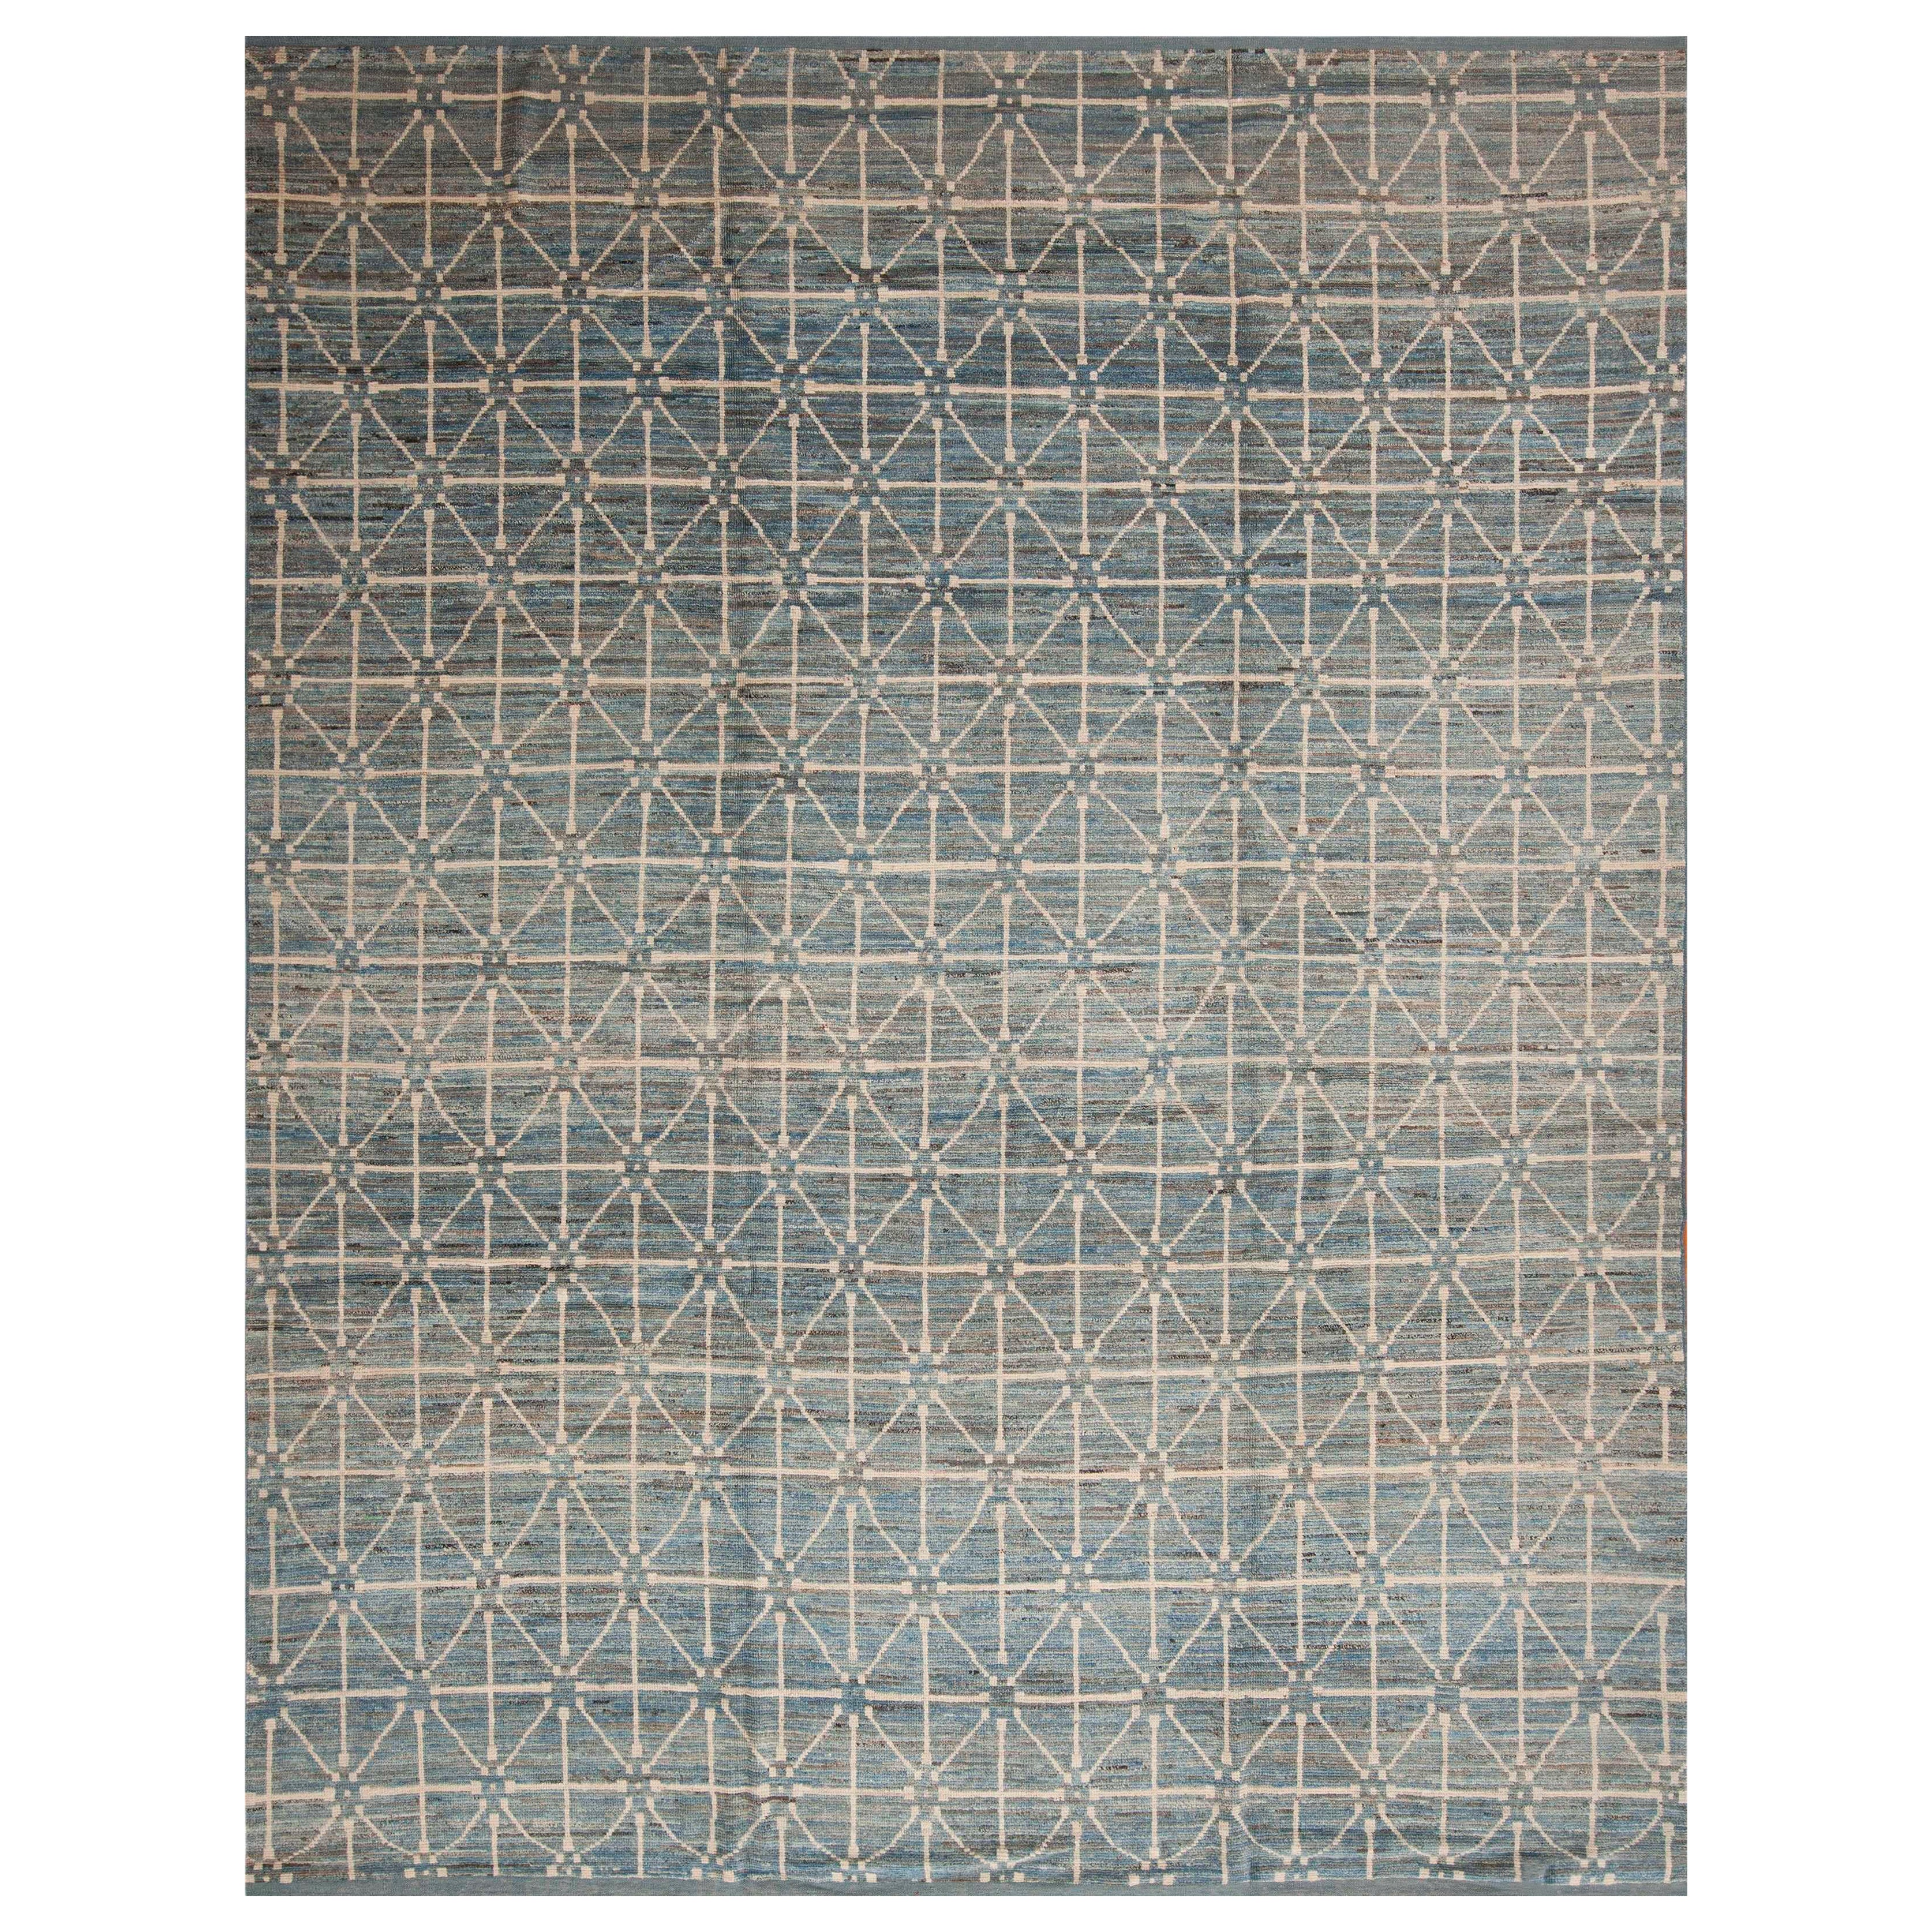 Nazmiyal Collection Grey Blue Color Allover Modern Area Rug 9'5" x 12'4" For Sale